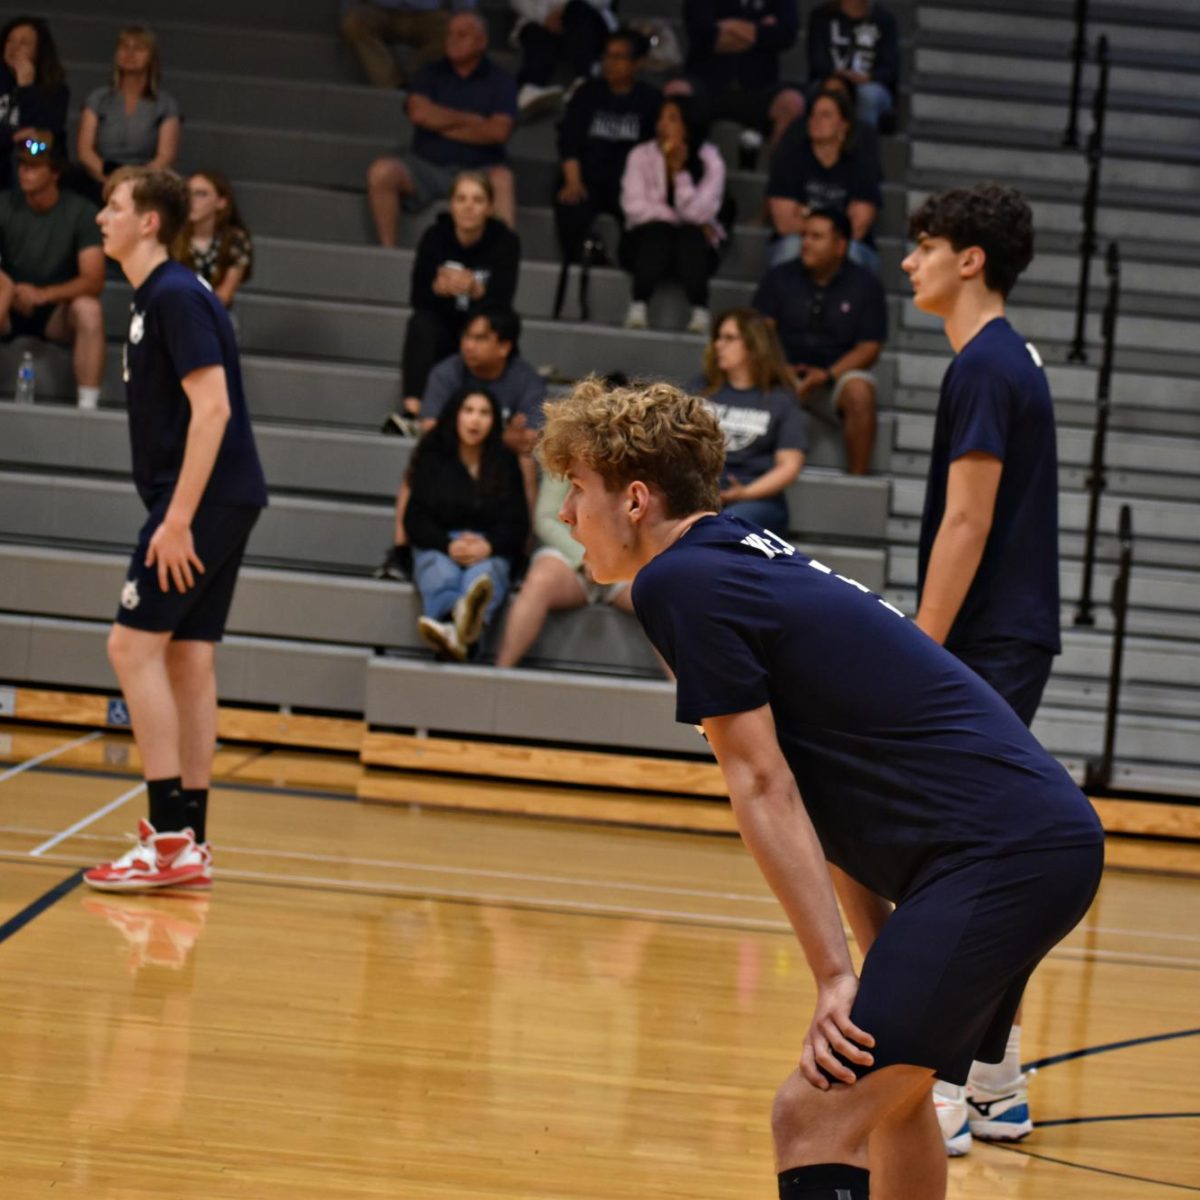 Junior Robert Witek anticipates the next serve during the final home game of the season.